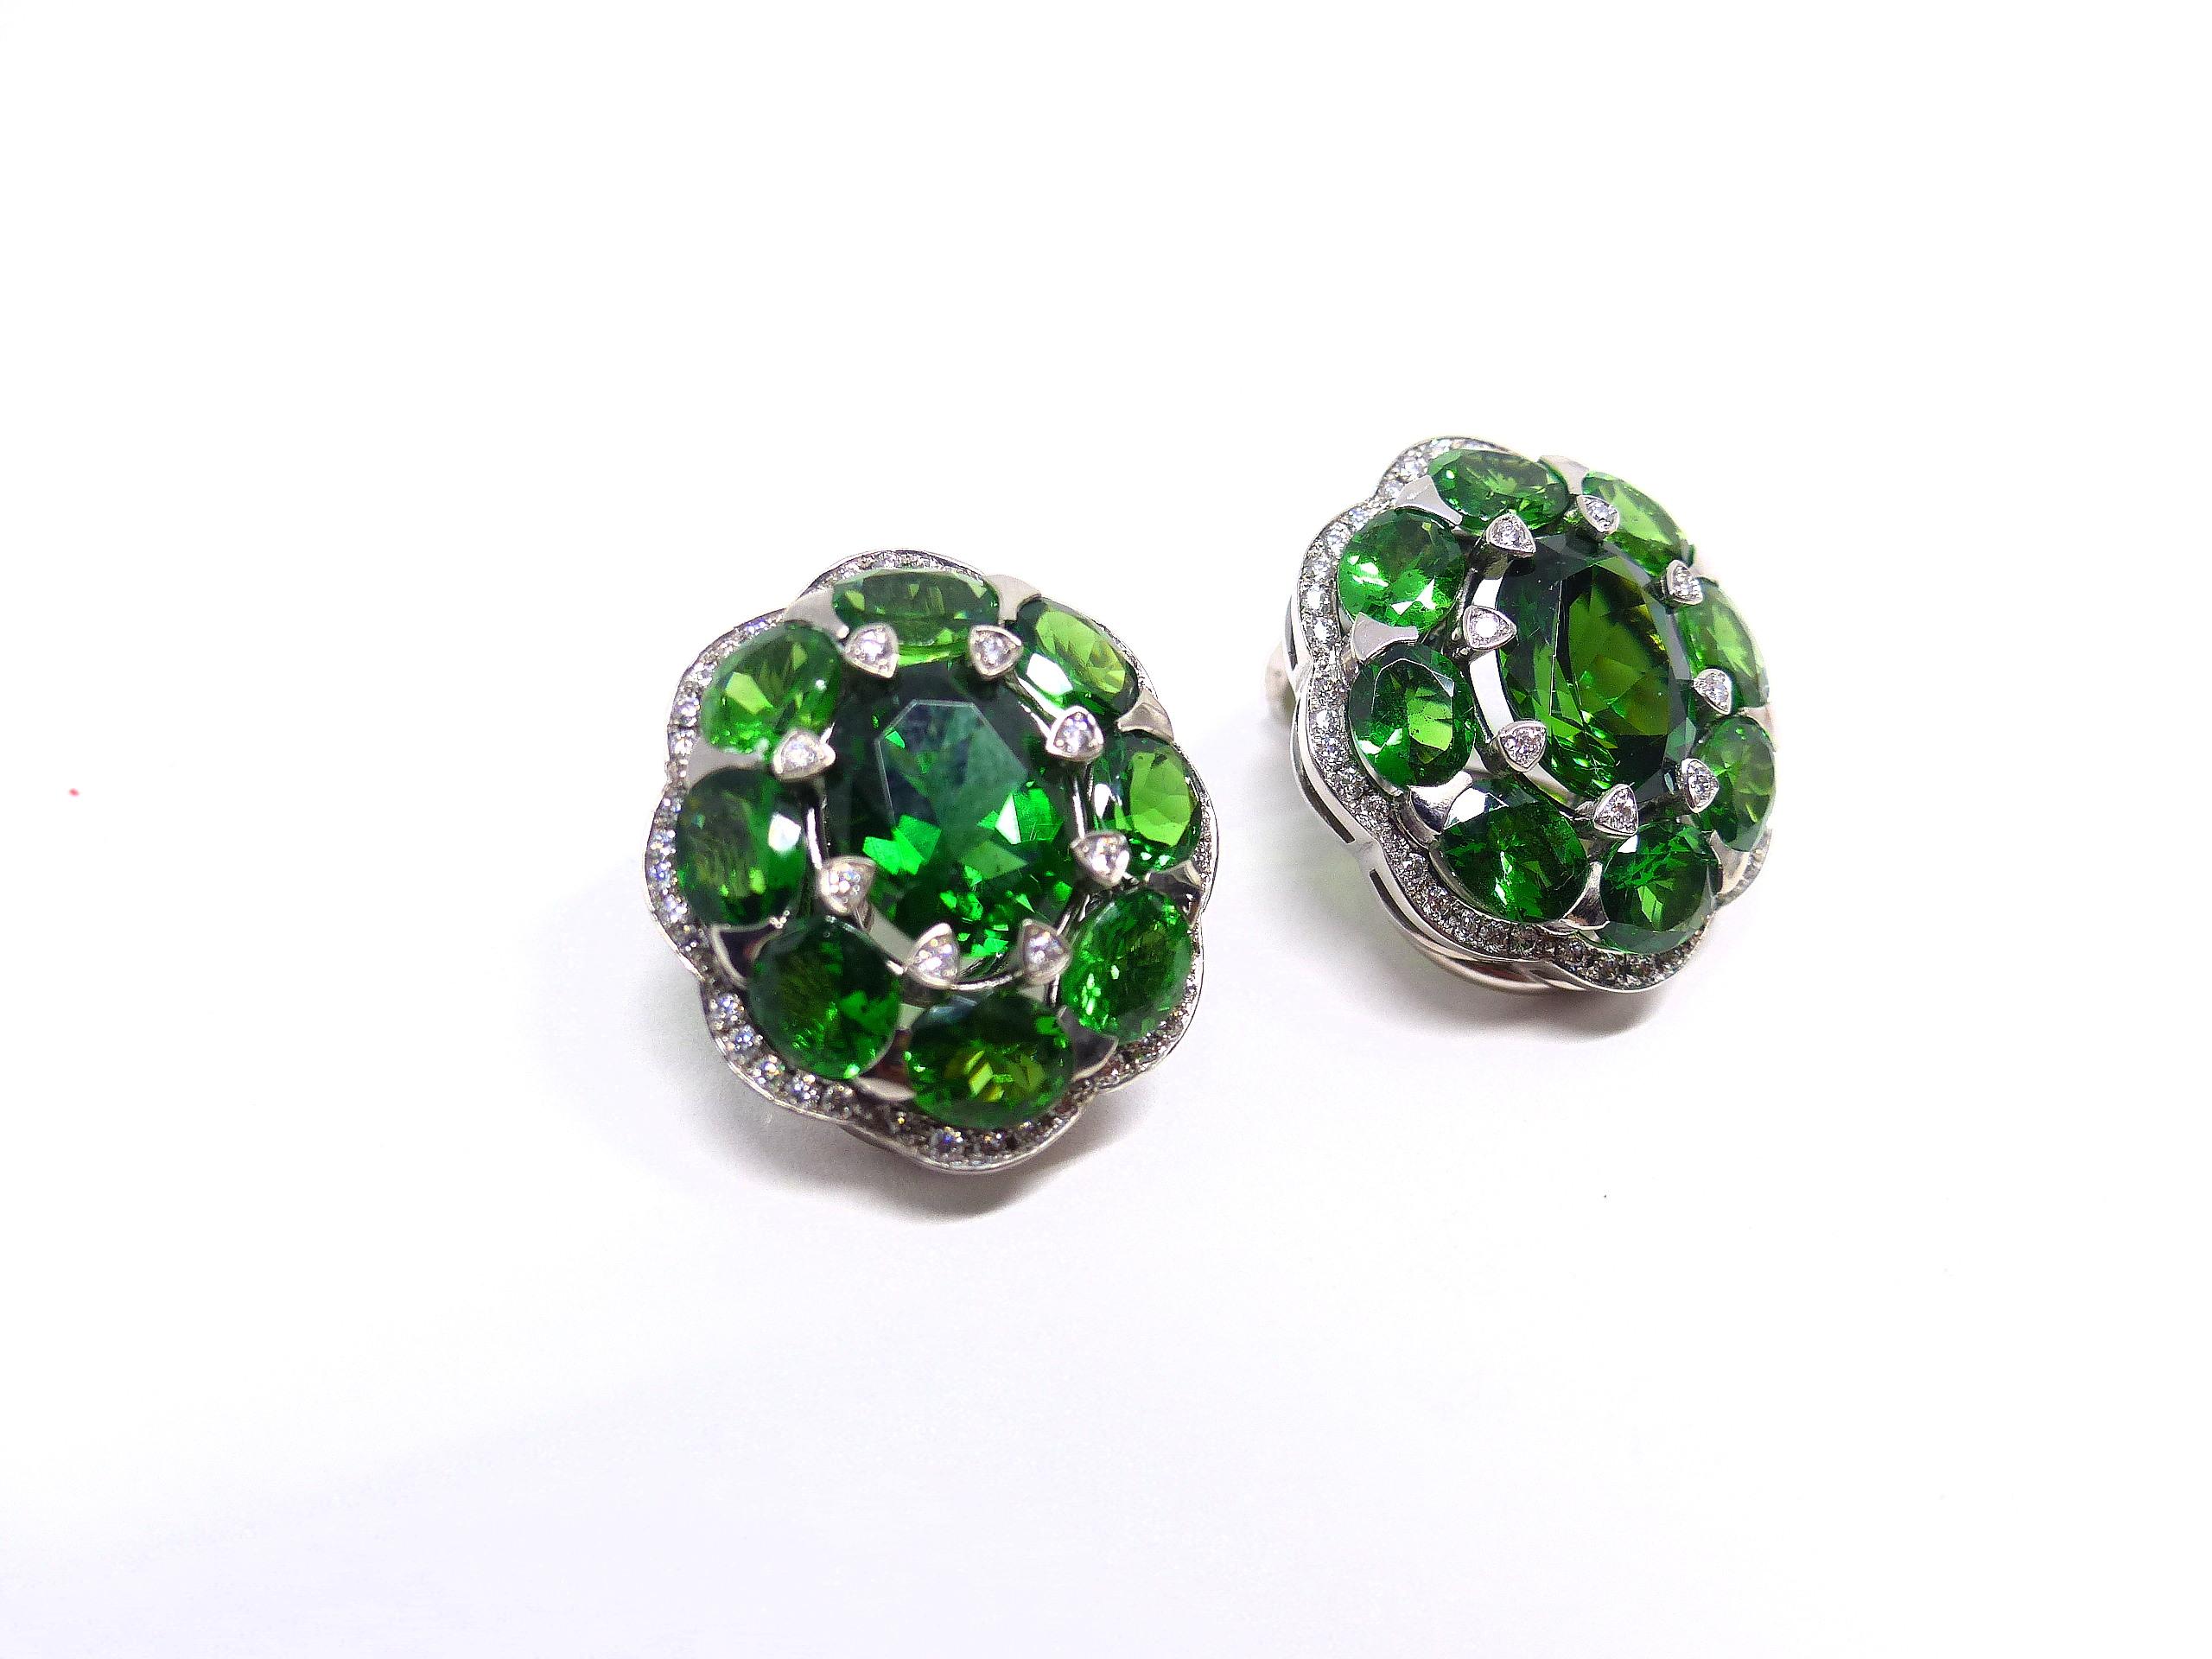 Thomas Leyser is renowned for his contemporary jewellery designs utilizing fine gemstones.

This 18k white gold (15.12g) pair of earrings is set with 2x fine Chrome-Tourmalines in intensiv green colour (oval, 9x7mm, 3.64ct) + 16x Tsavorites (oval,